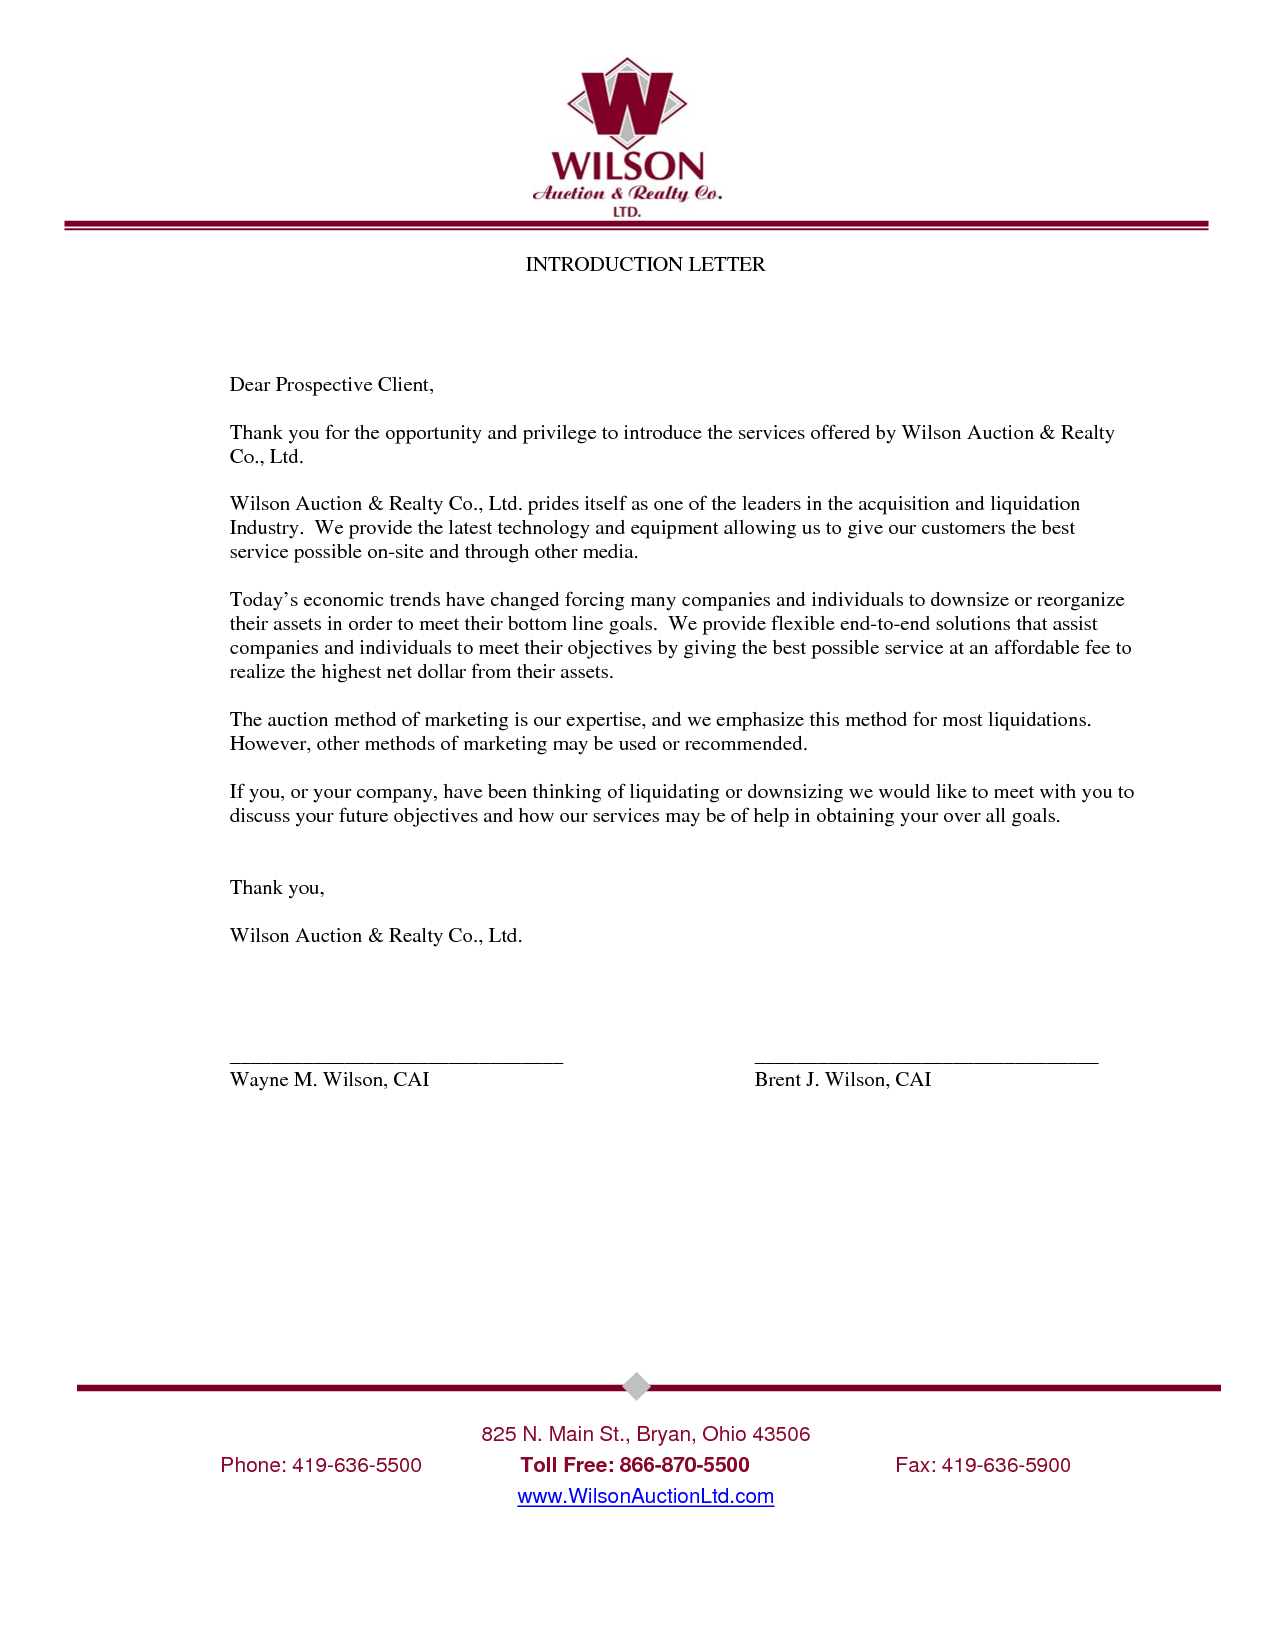 New Business Introduction Letter Scrumps